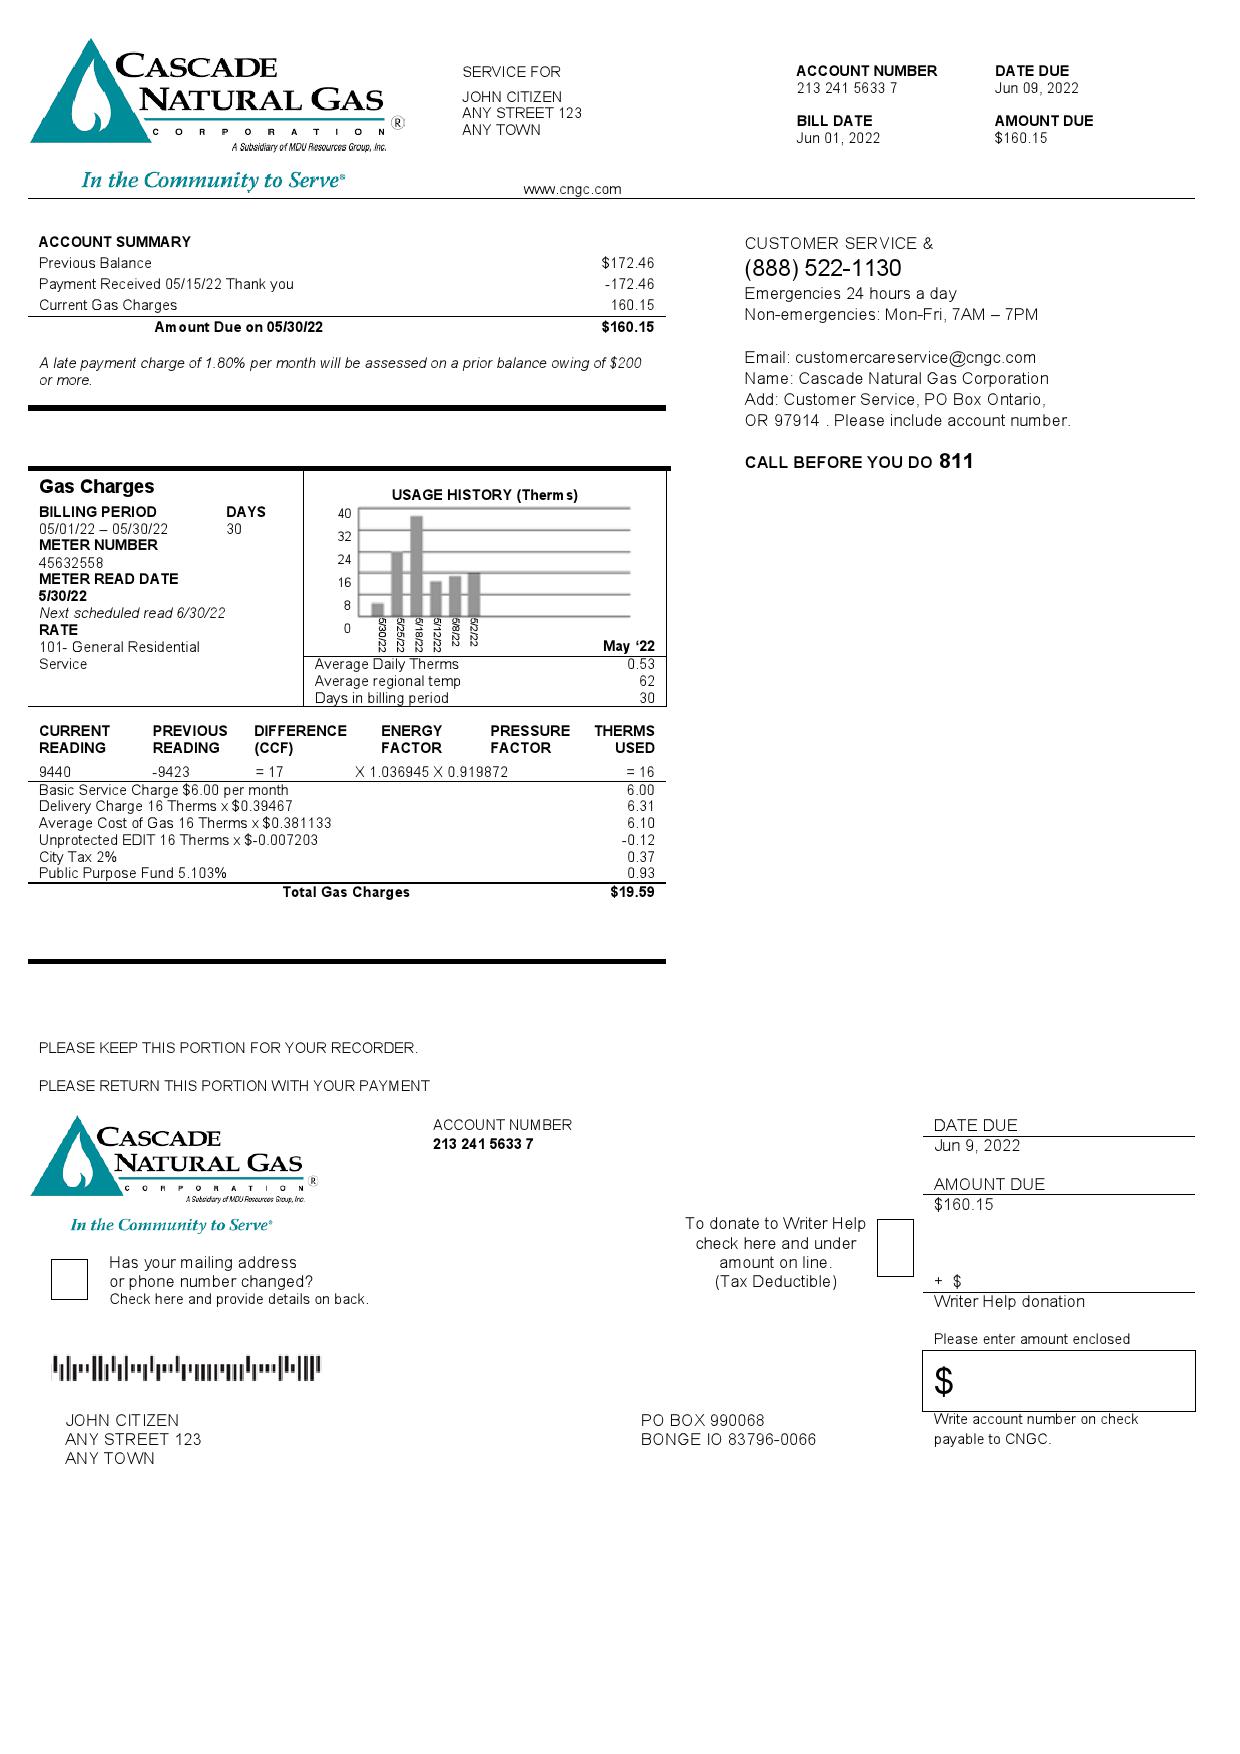 USA Cascade Natural Gas utility bill, Word and PDF template